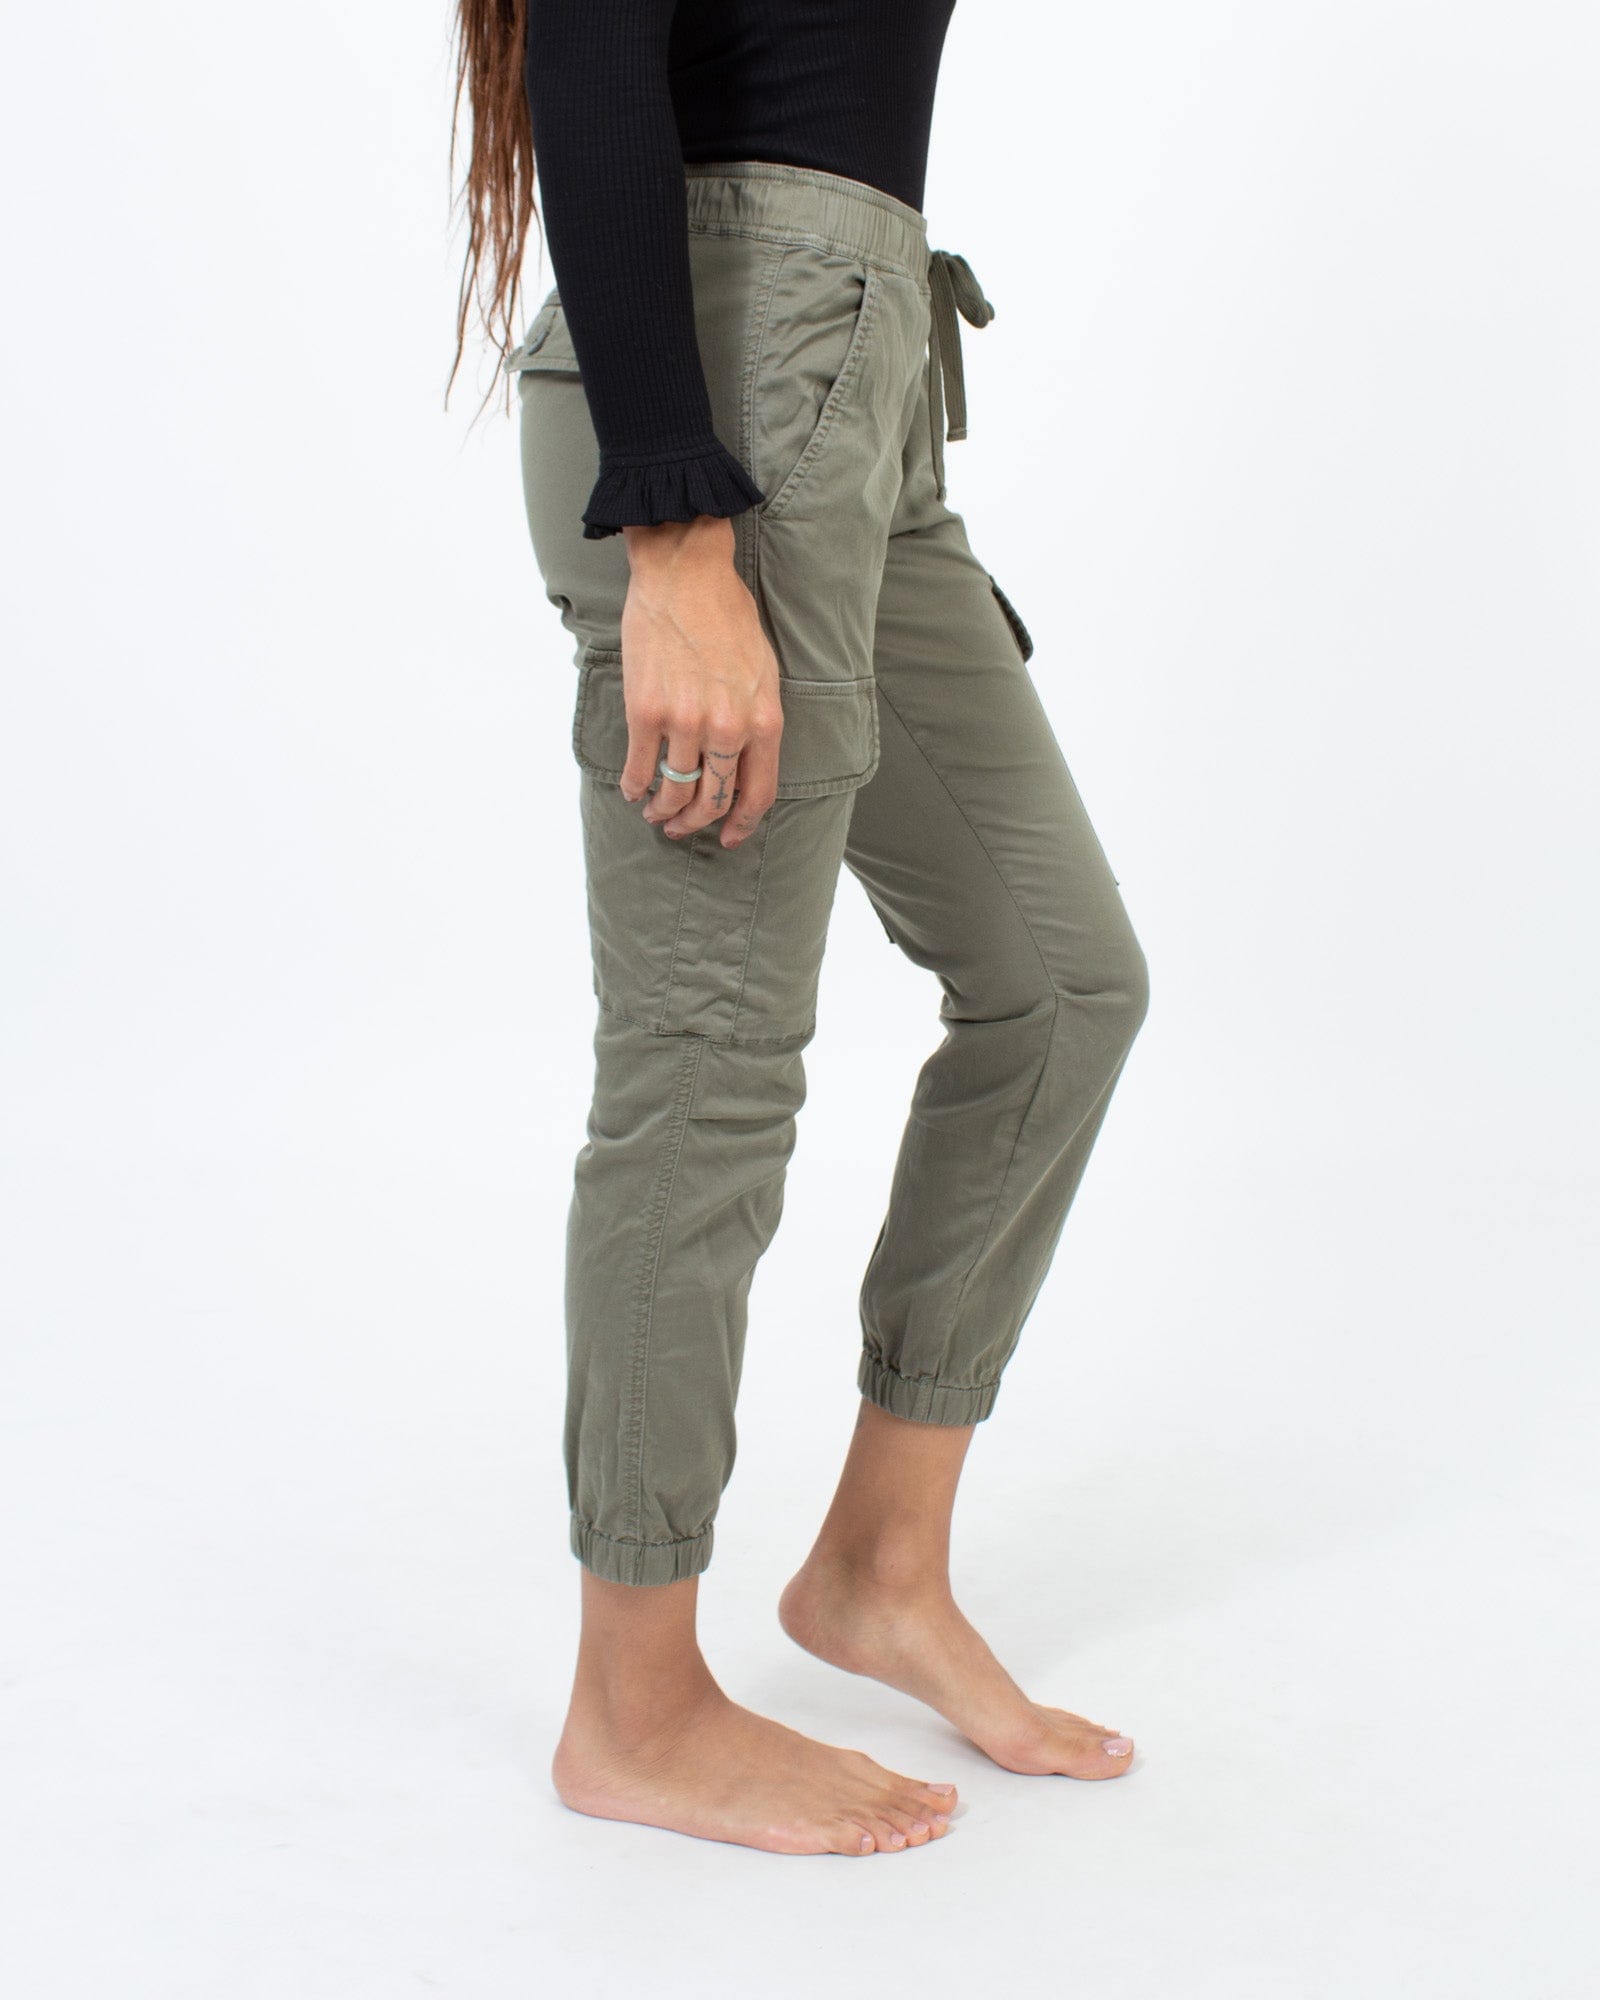 The Vintage Camo Pant in Army 